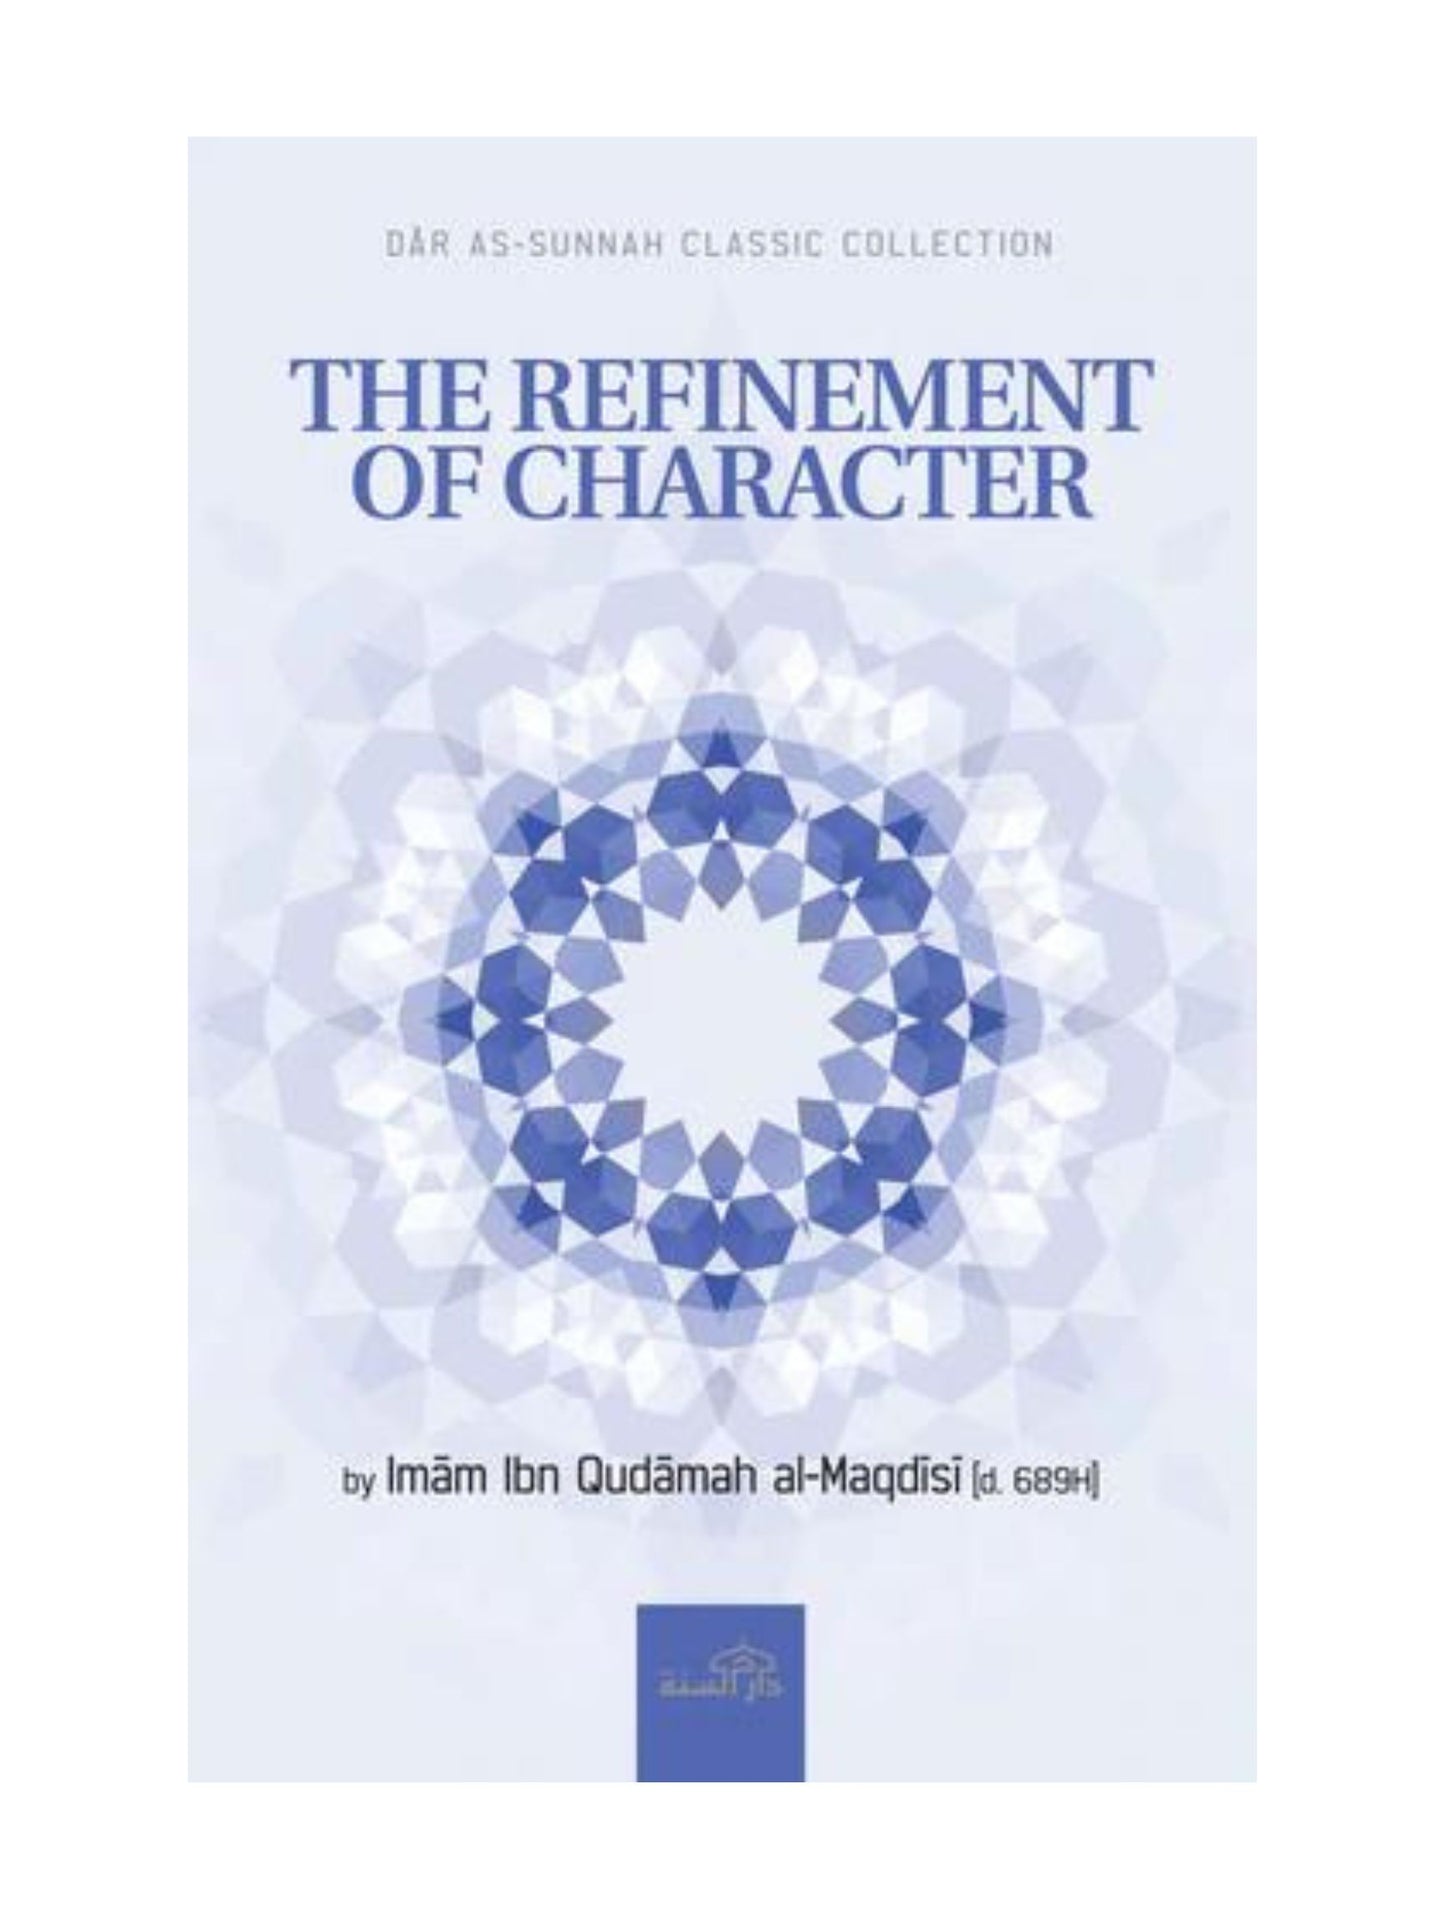 THE REFINEMENT OF CHARACTER BY IBN QUDAMAH AL-MAQDISI [D. 689H]